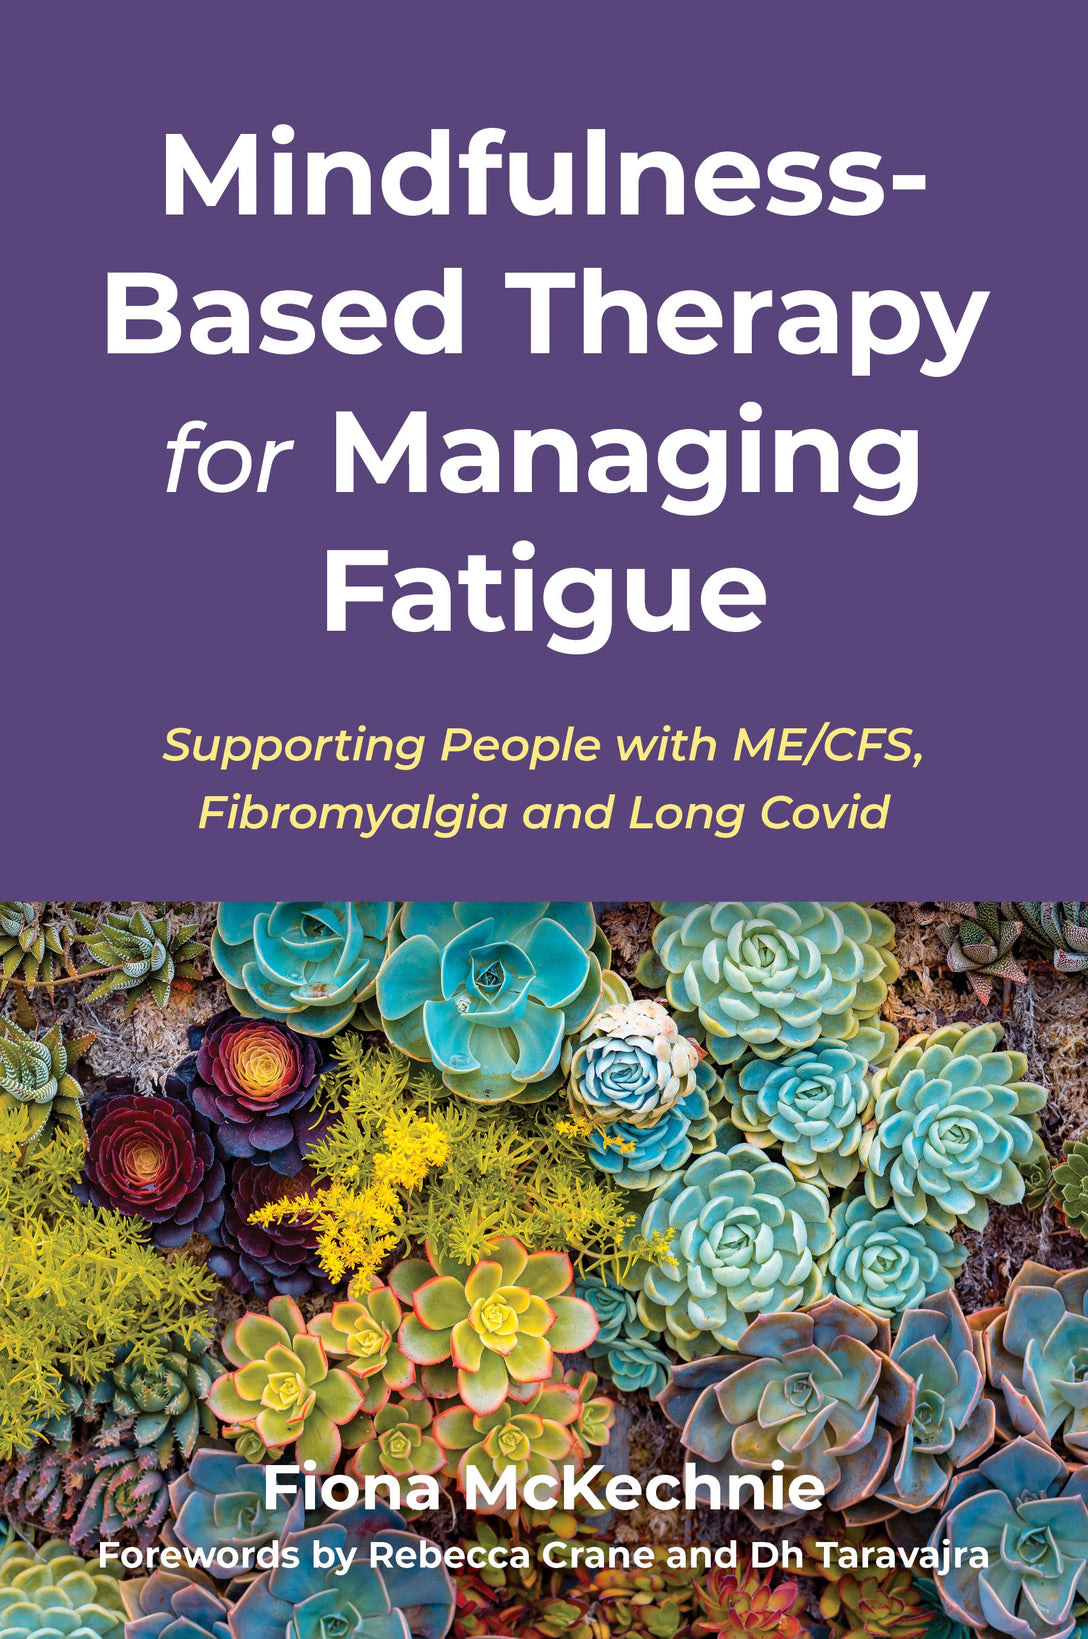 Mindfulness-Based Therapy for Managing Fatigue by Fiona McKechnie